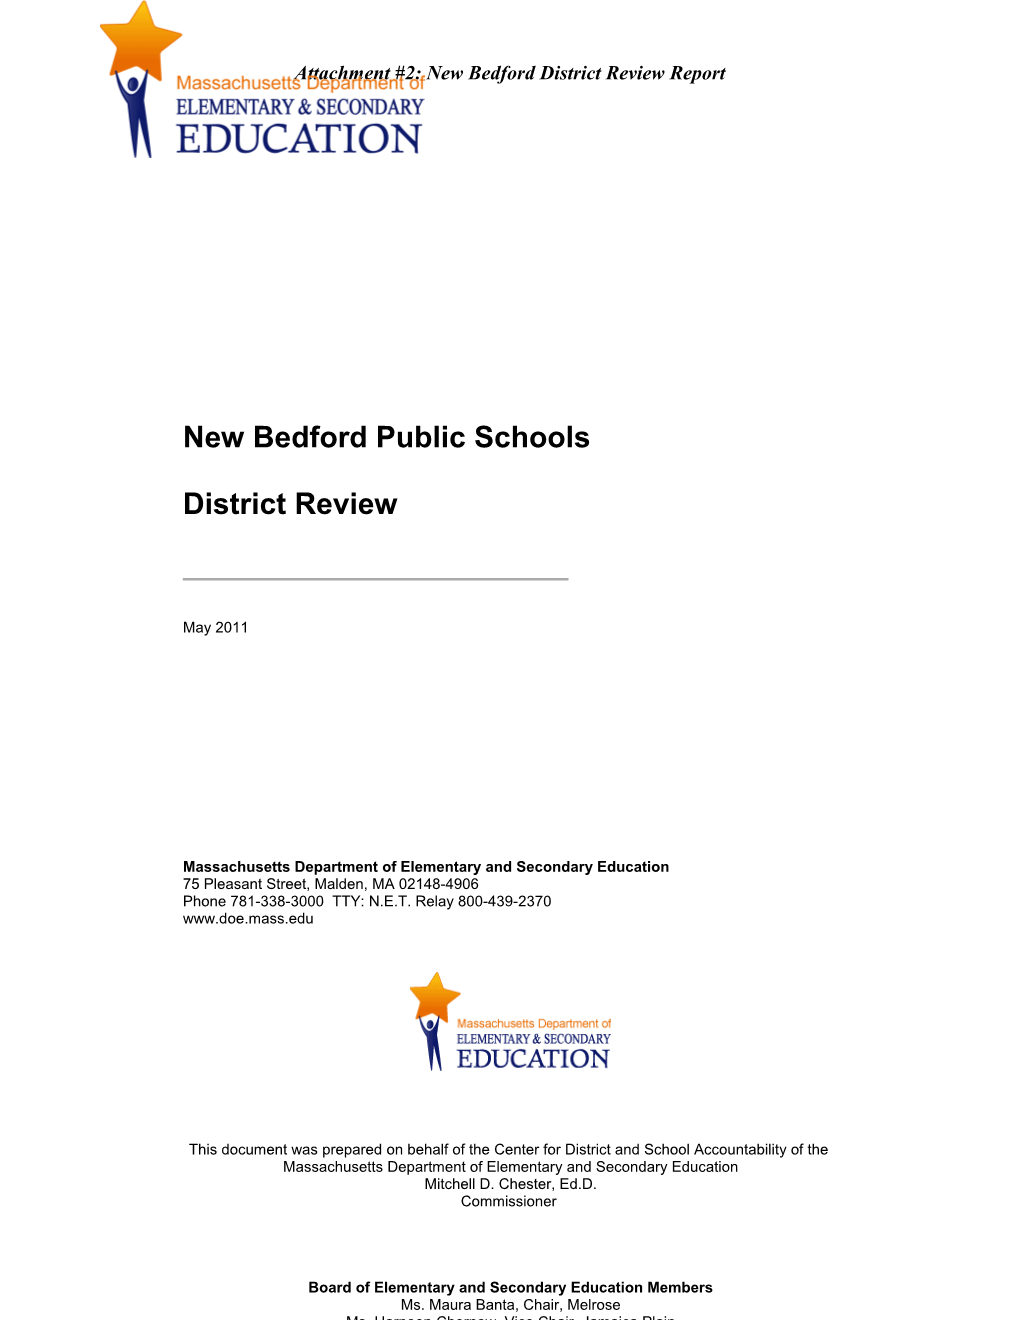 Attachment 2: New Bedford Public Schools Review Report, May 2011